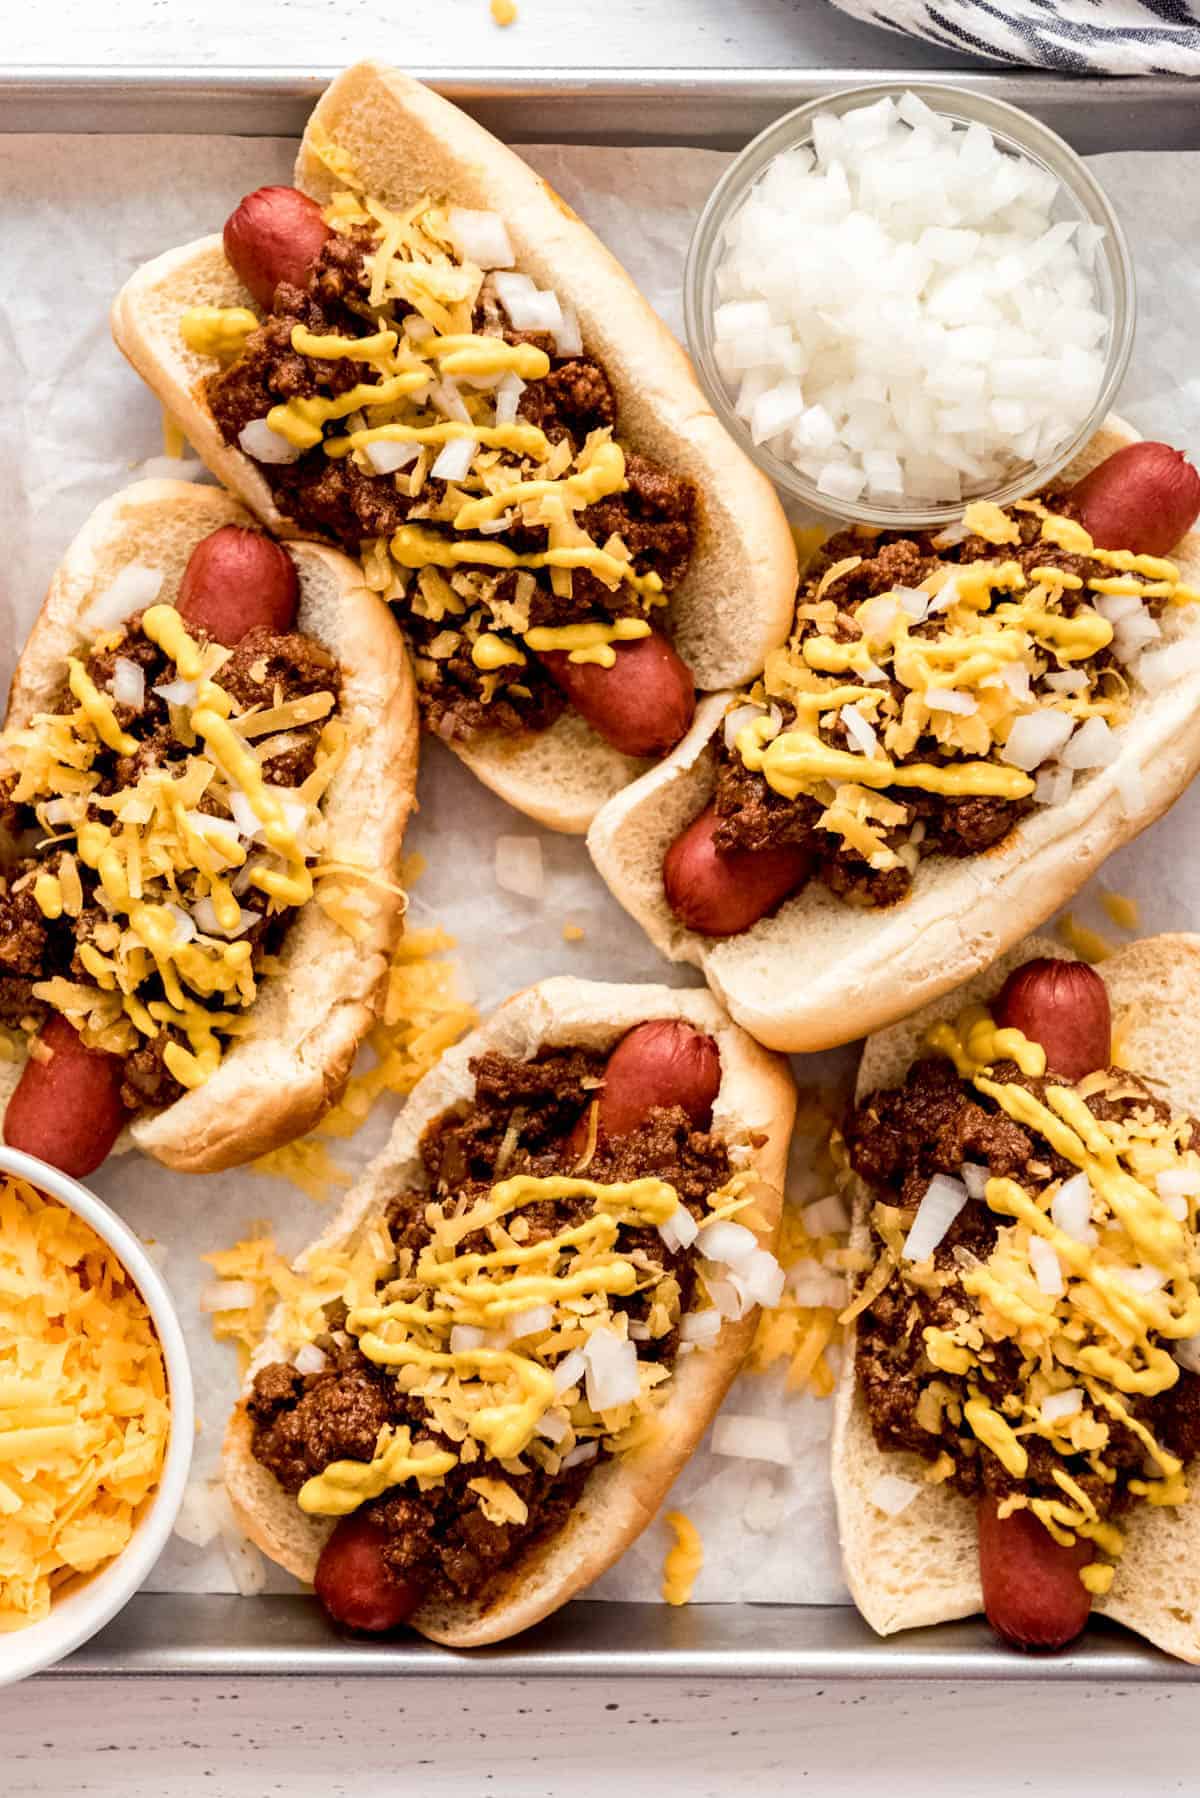 Coney Island hot dogs assembled on a baking sheet with a bowl of cheese and a bowl of onions